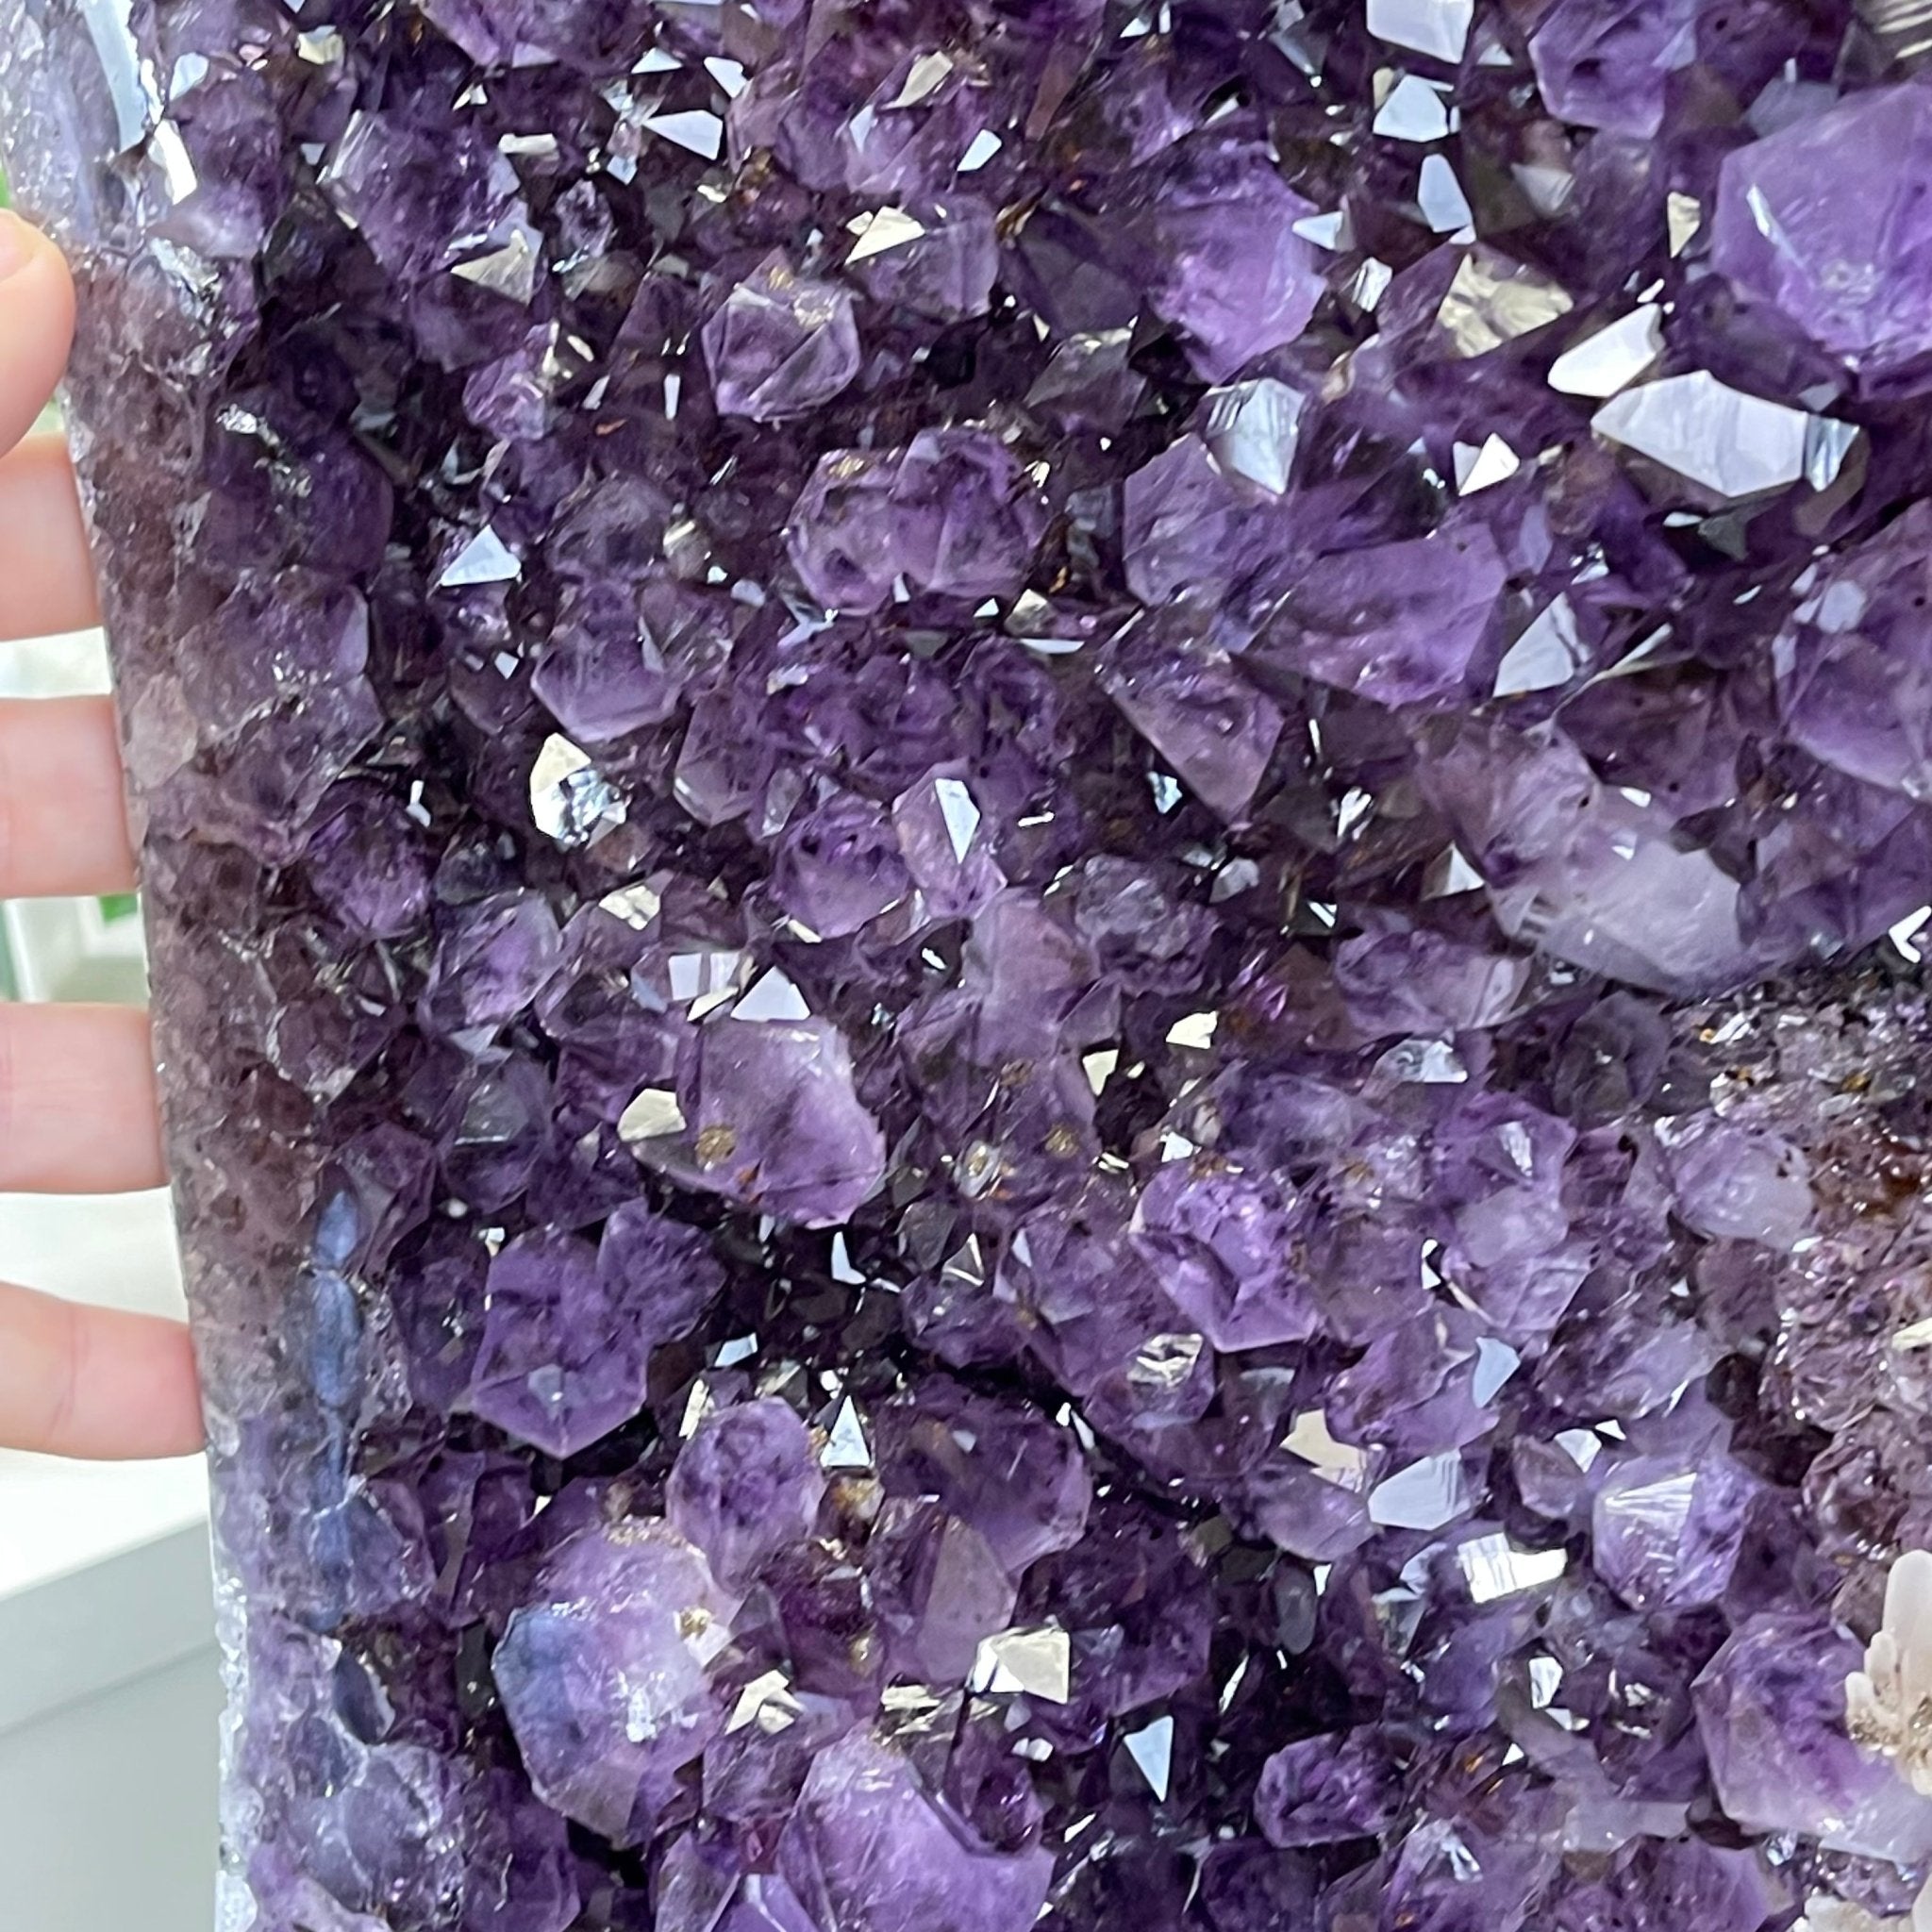 Large Super Quality Brazilian Amethyst Cathedral, 55" Tall & 326.3 lbs, Model #5601-0891 by Brazil Gems - Brazil GemsBrazil GemsLarge Super Quality Brazilian Amethyst Cathedral, 55" Tall & 326.3 lbs, Model #5601-0891 by Brazil GemsCathedrals5601-0891